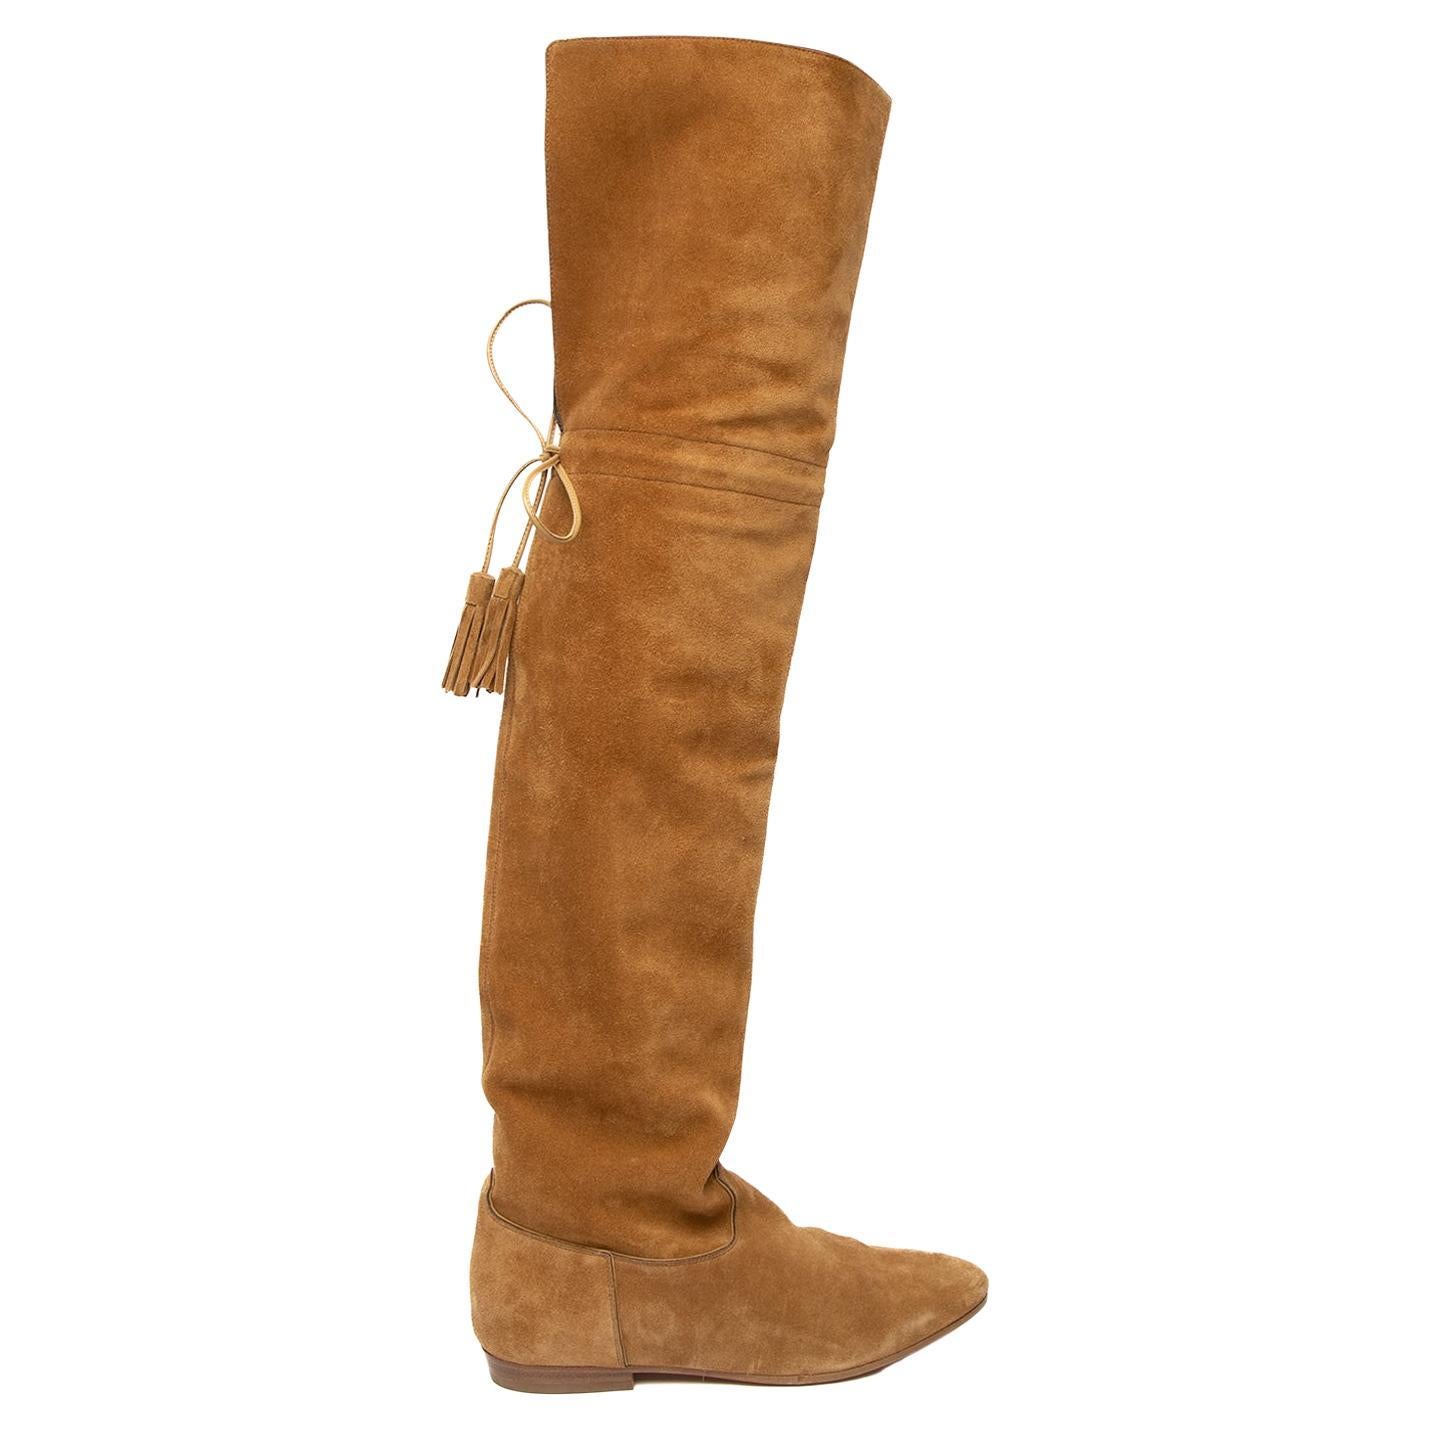 Pre-Loved Céline Women's Chat Botté Over-The-Knee Flat Boot in Suede Calfskin